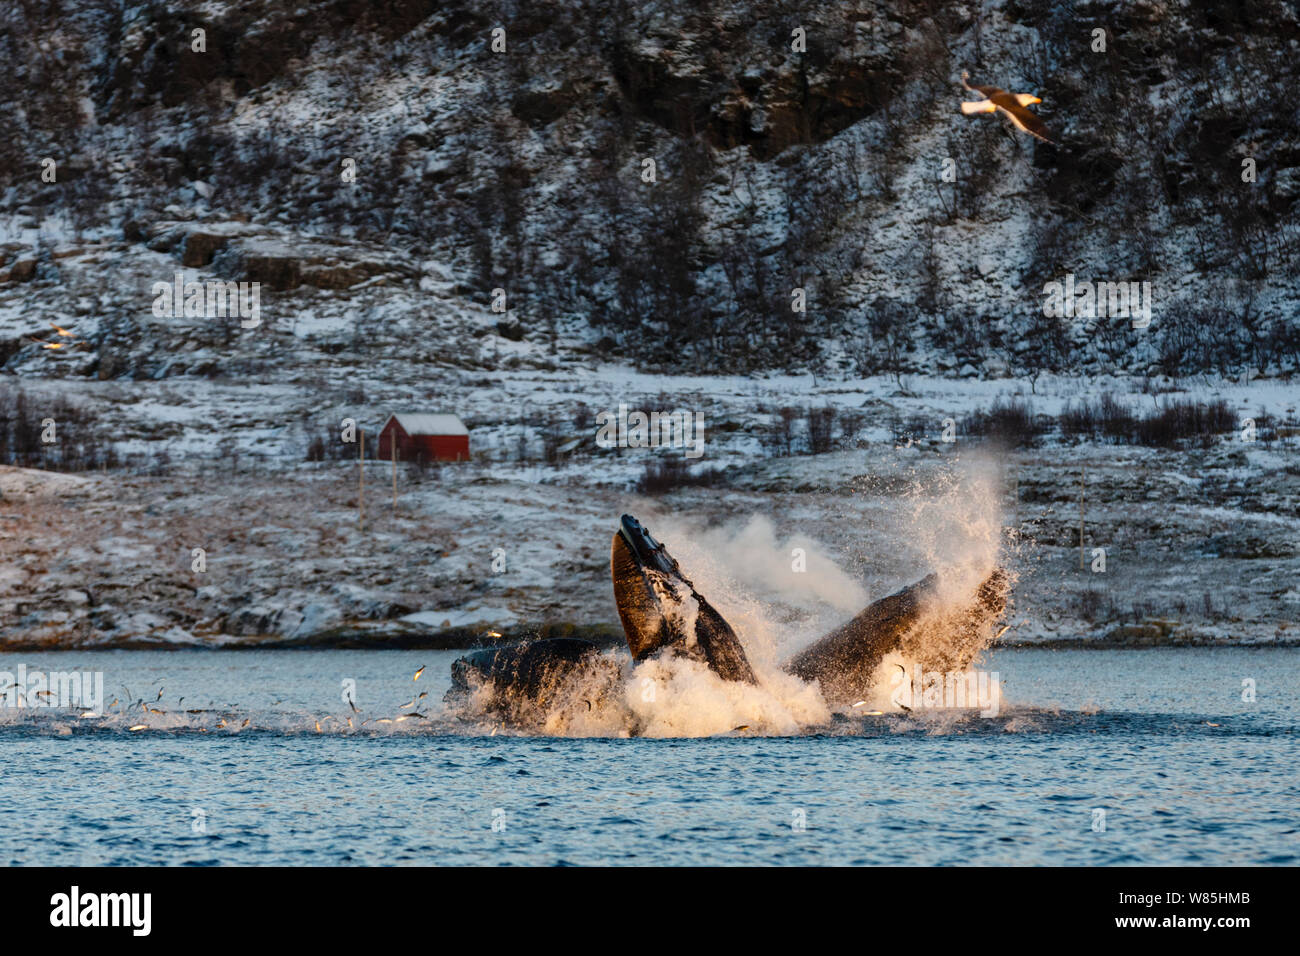 Humpback whales (Megaptera novaeangliae) feeding on Herring  (Clupea harengus) showing baleen plates. Herring jumping out of water to escape. Kvaloya, Troms, Northern Norway. November. Stock Photo